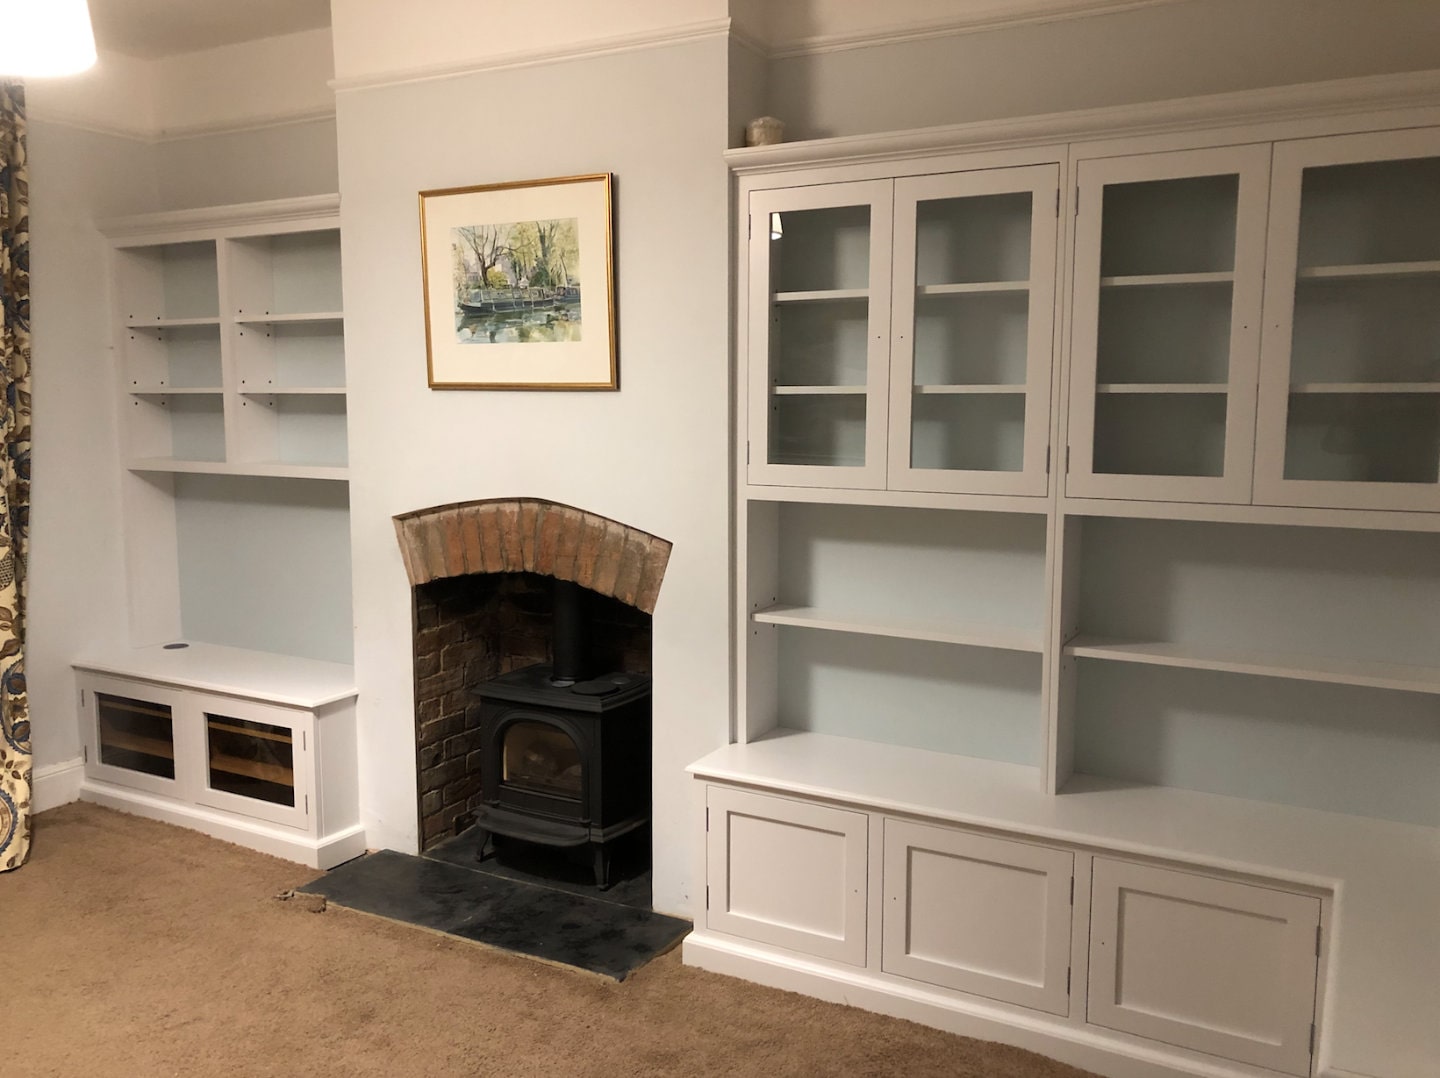 Two bespoke bookcases with a fireplace between them.